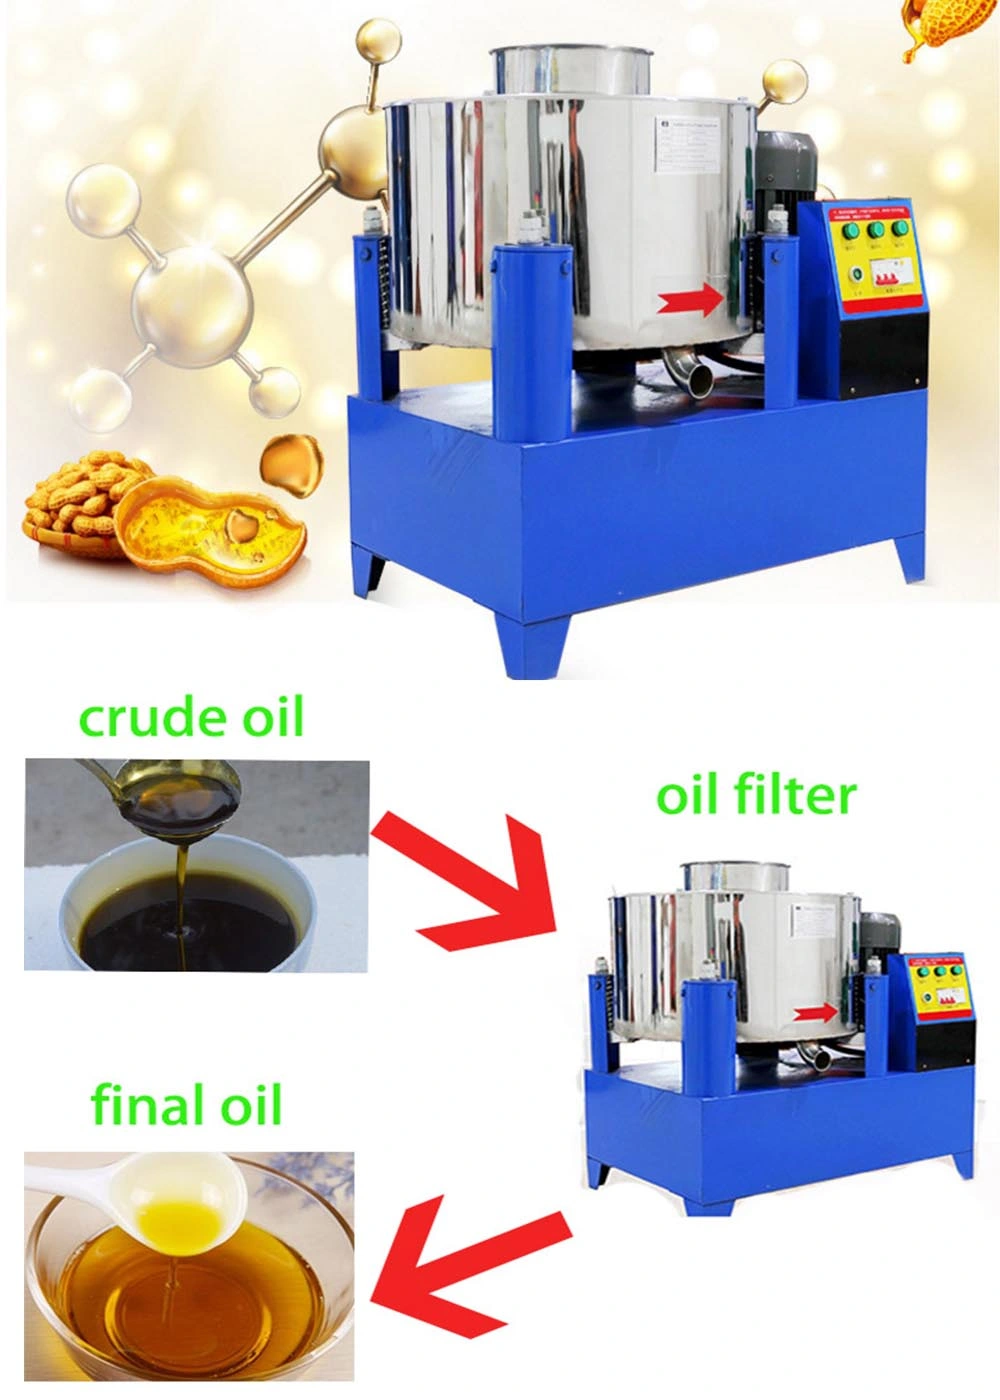 Filter for Edible Oil Filtered Edible Oil Brands in India